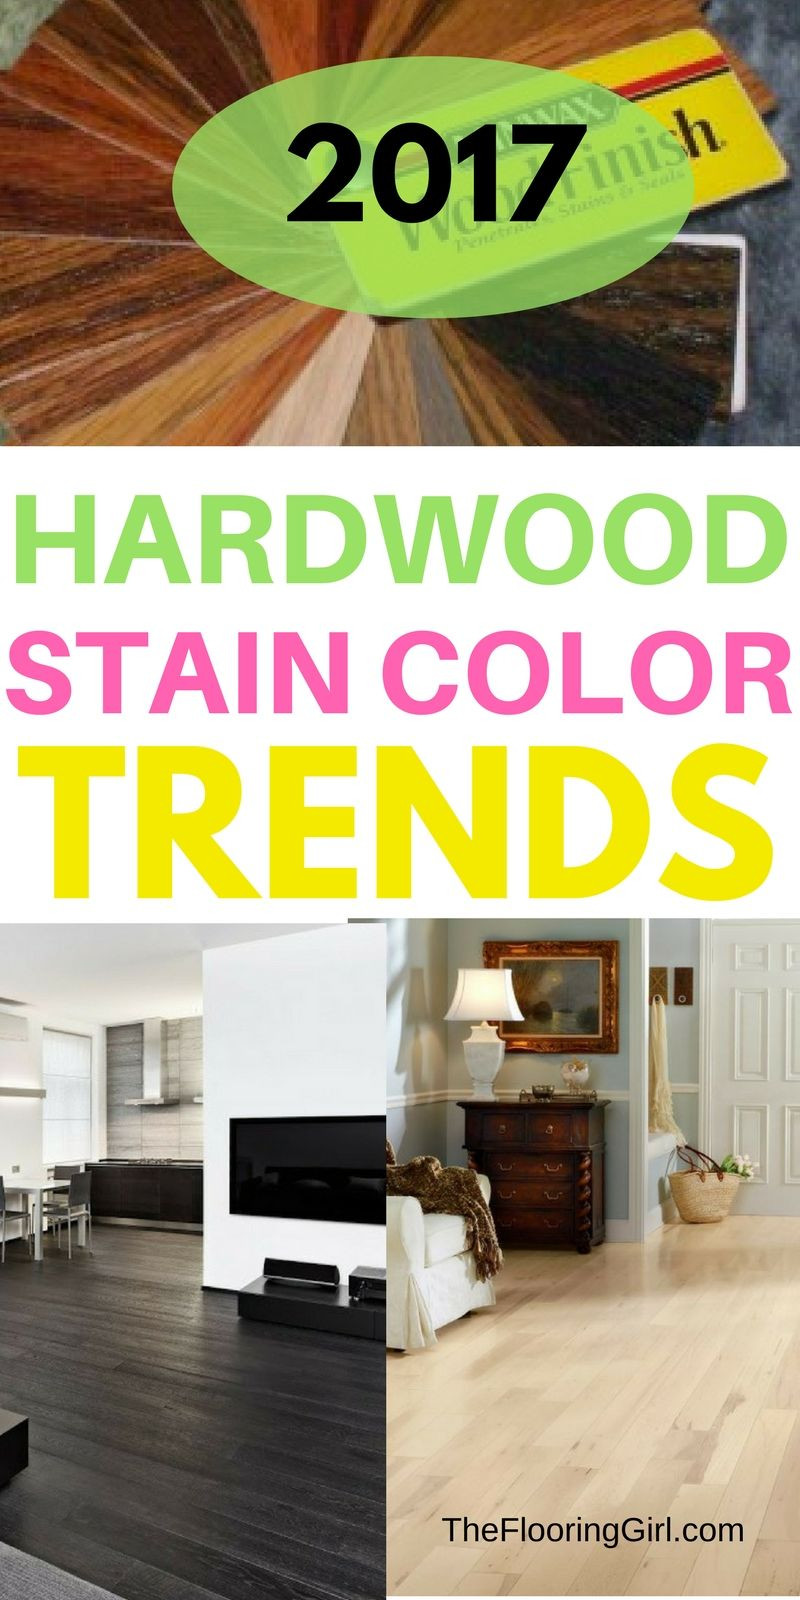 22 Awesome Hardwood Floor Restoration before and after 2024 free download hardwood floor restoration before and after of hardwood flooring stain color trends 2018 more from the flooring with hardwood flooring stain color trends for 2017 hardwood colors that are in